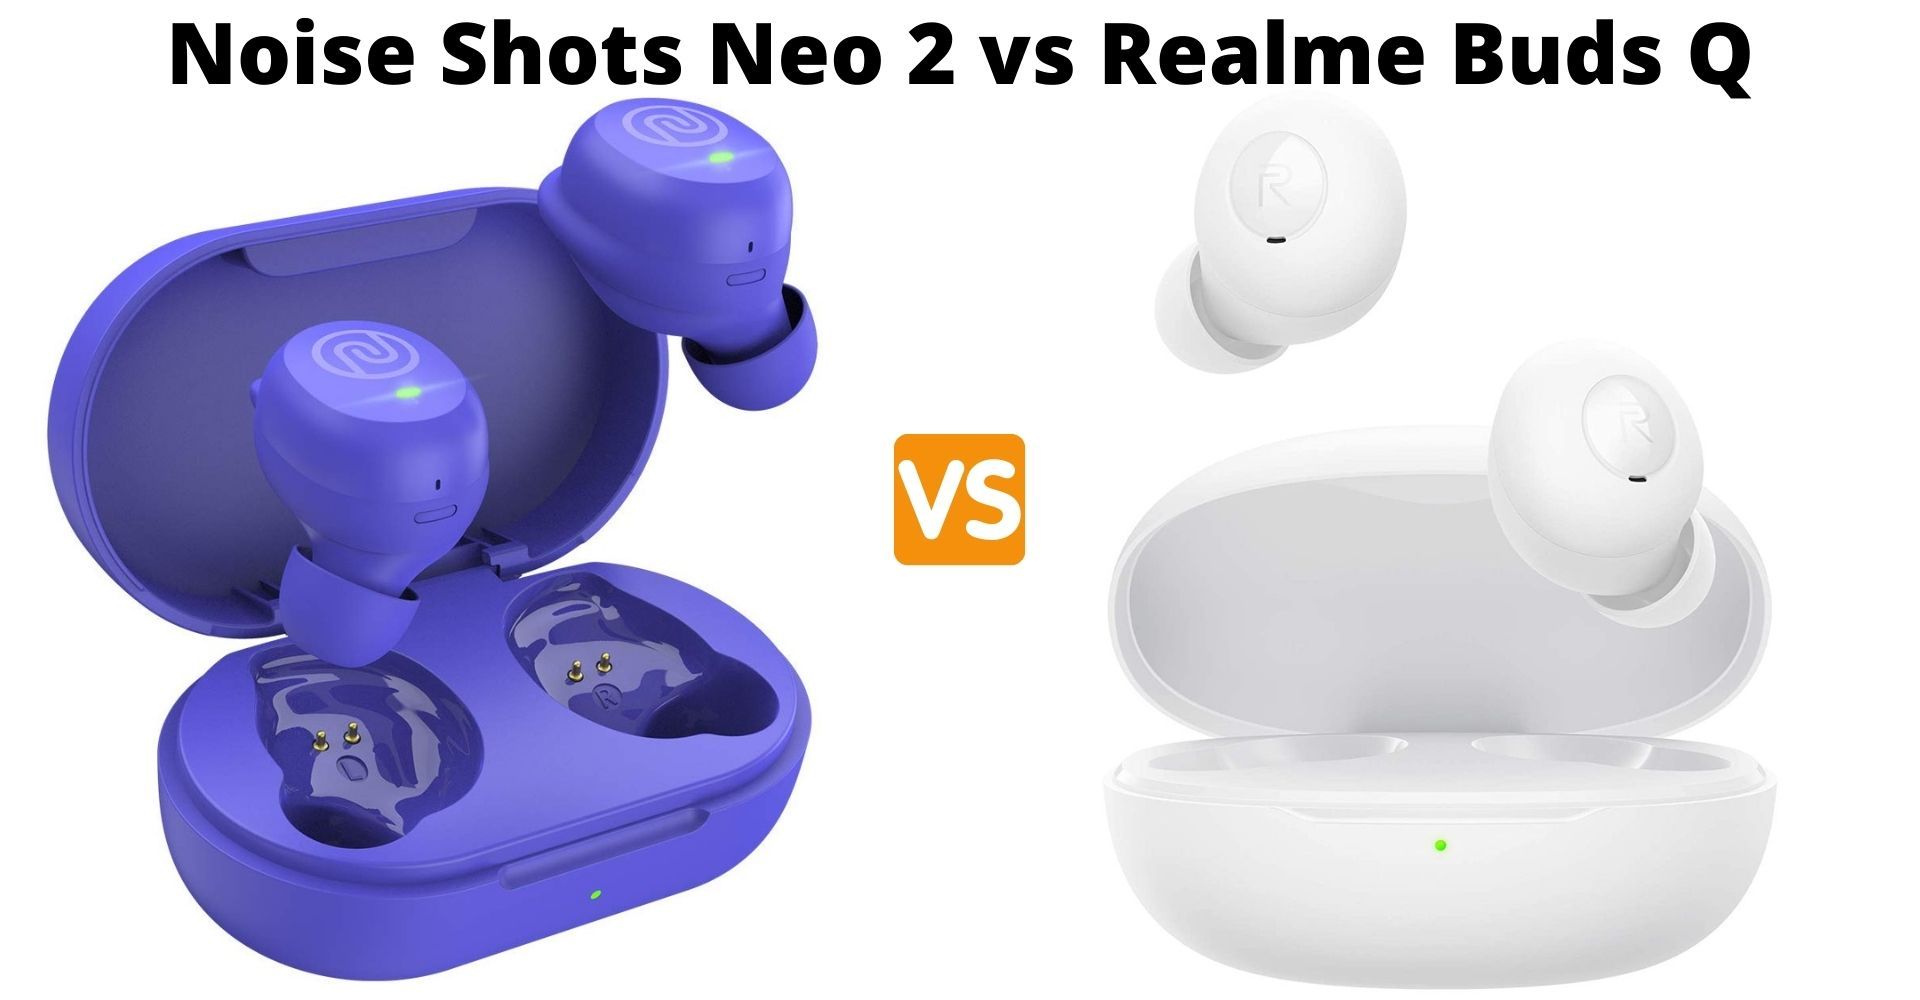 Noise Shots Neo 2 vs Realme Buds Q – Which One To Buy?